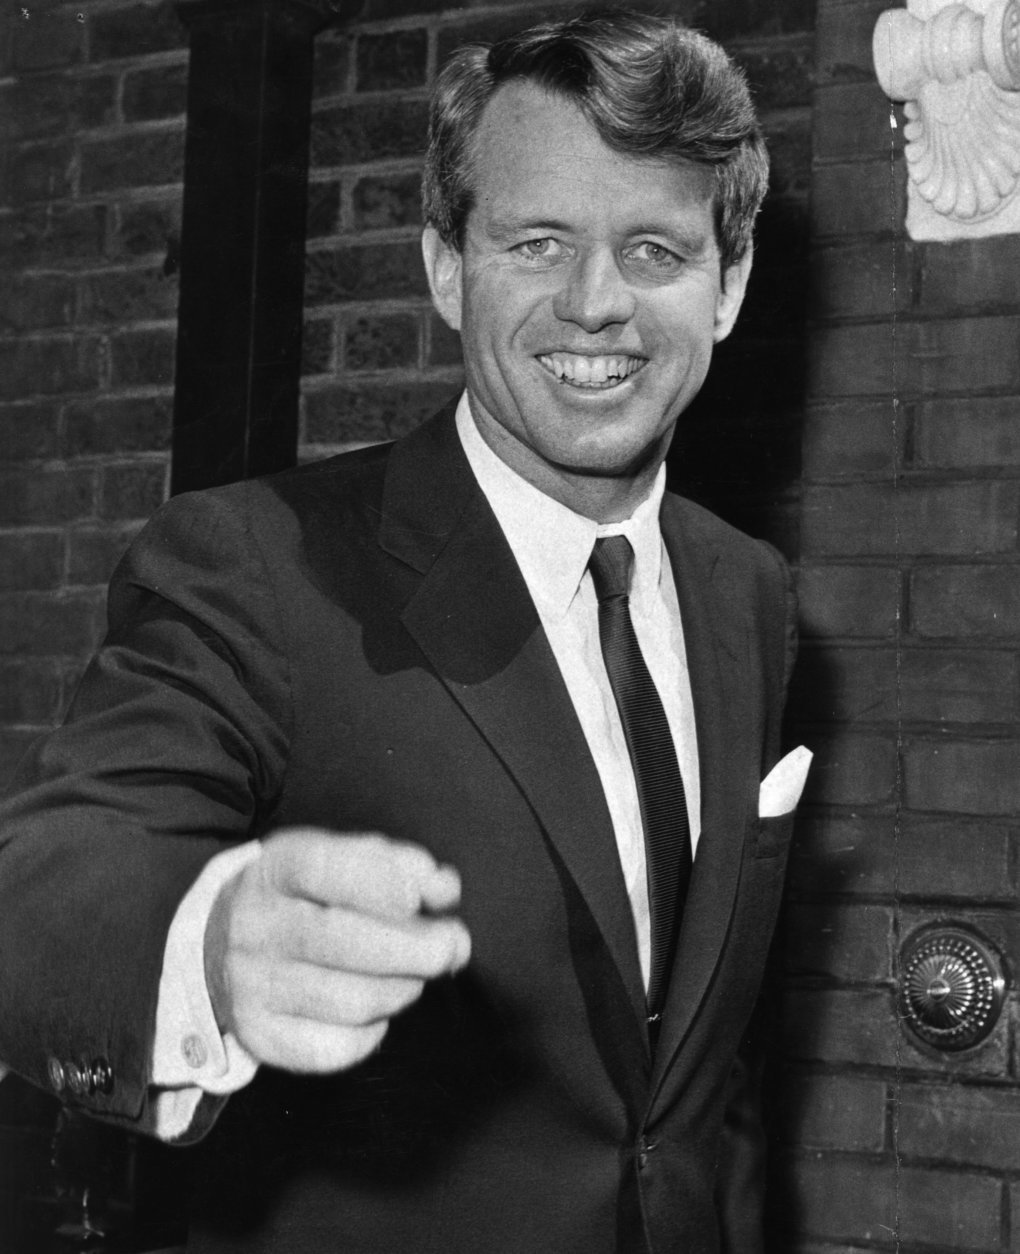 Senator for New York and attorney-general, Robert Kennedy (1925 - 1968).    (Photo by Hulton Archive/Getty Images)